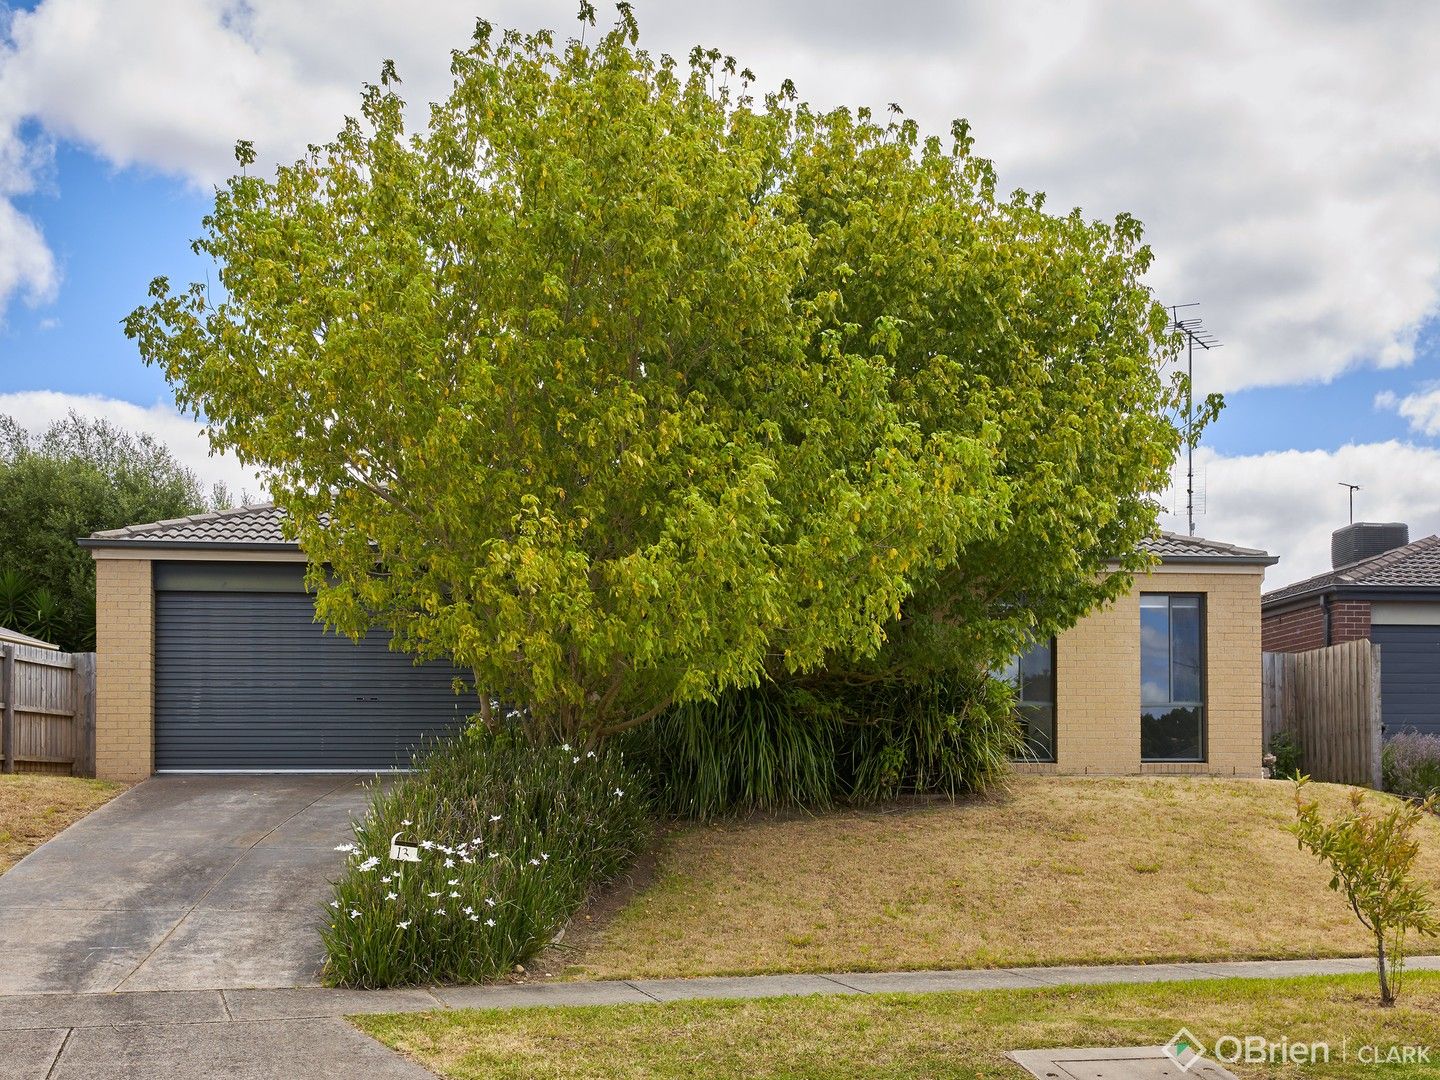 4 bedrooms House in 13 Harmon Drive DROUIN VIC, 3818